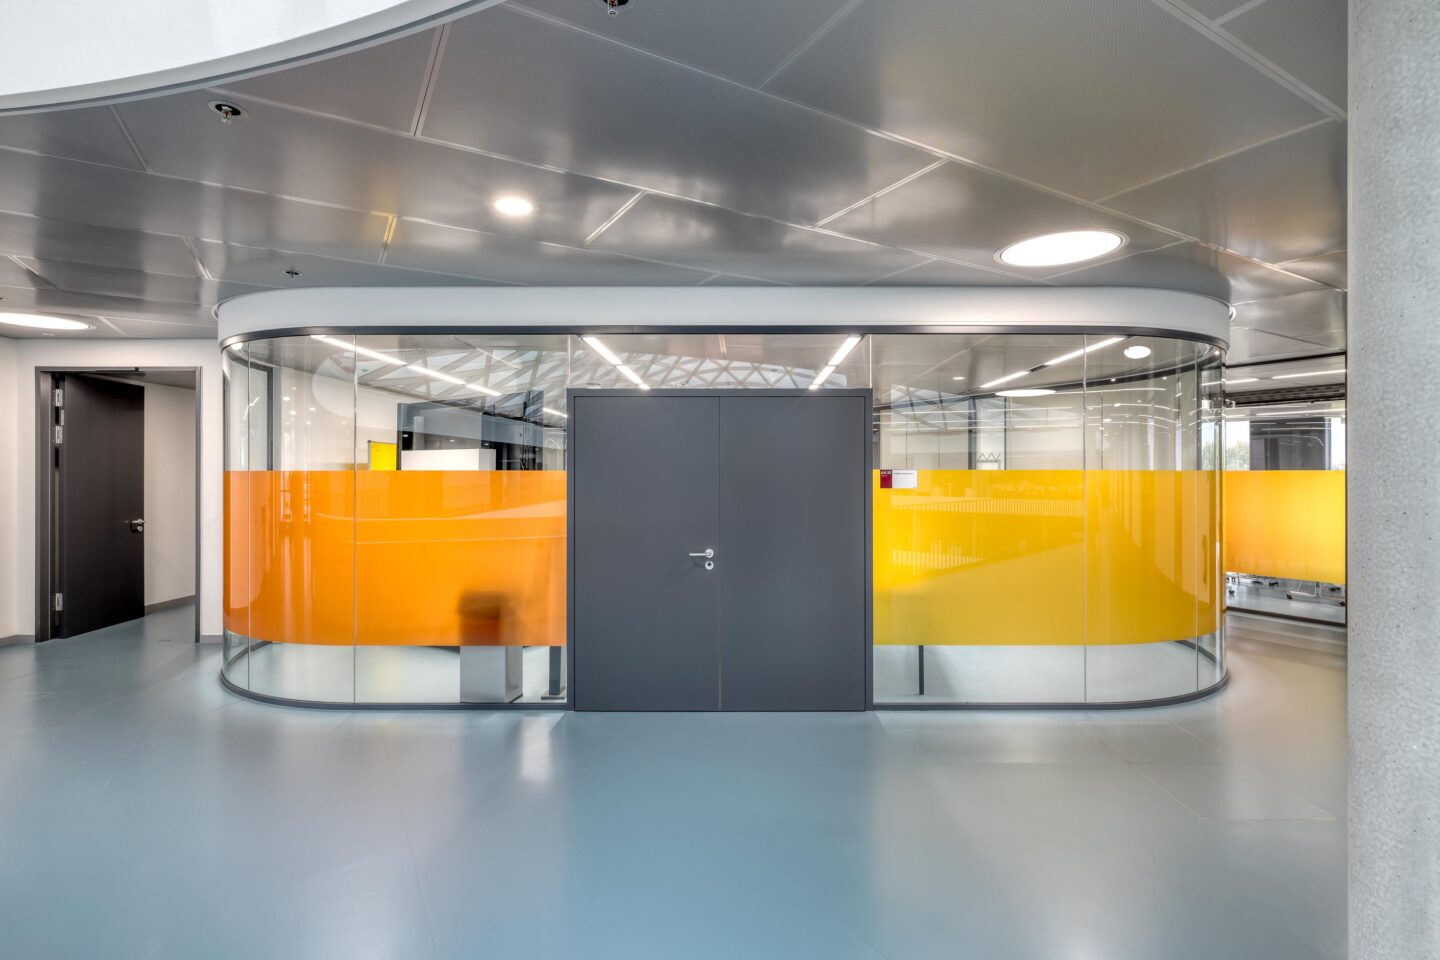 DHBW Stuttgart, Faculty of Engineering | room with glass walls